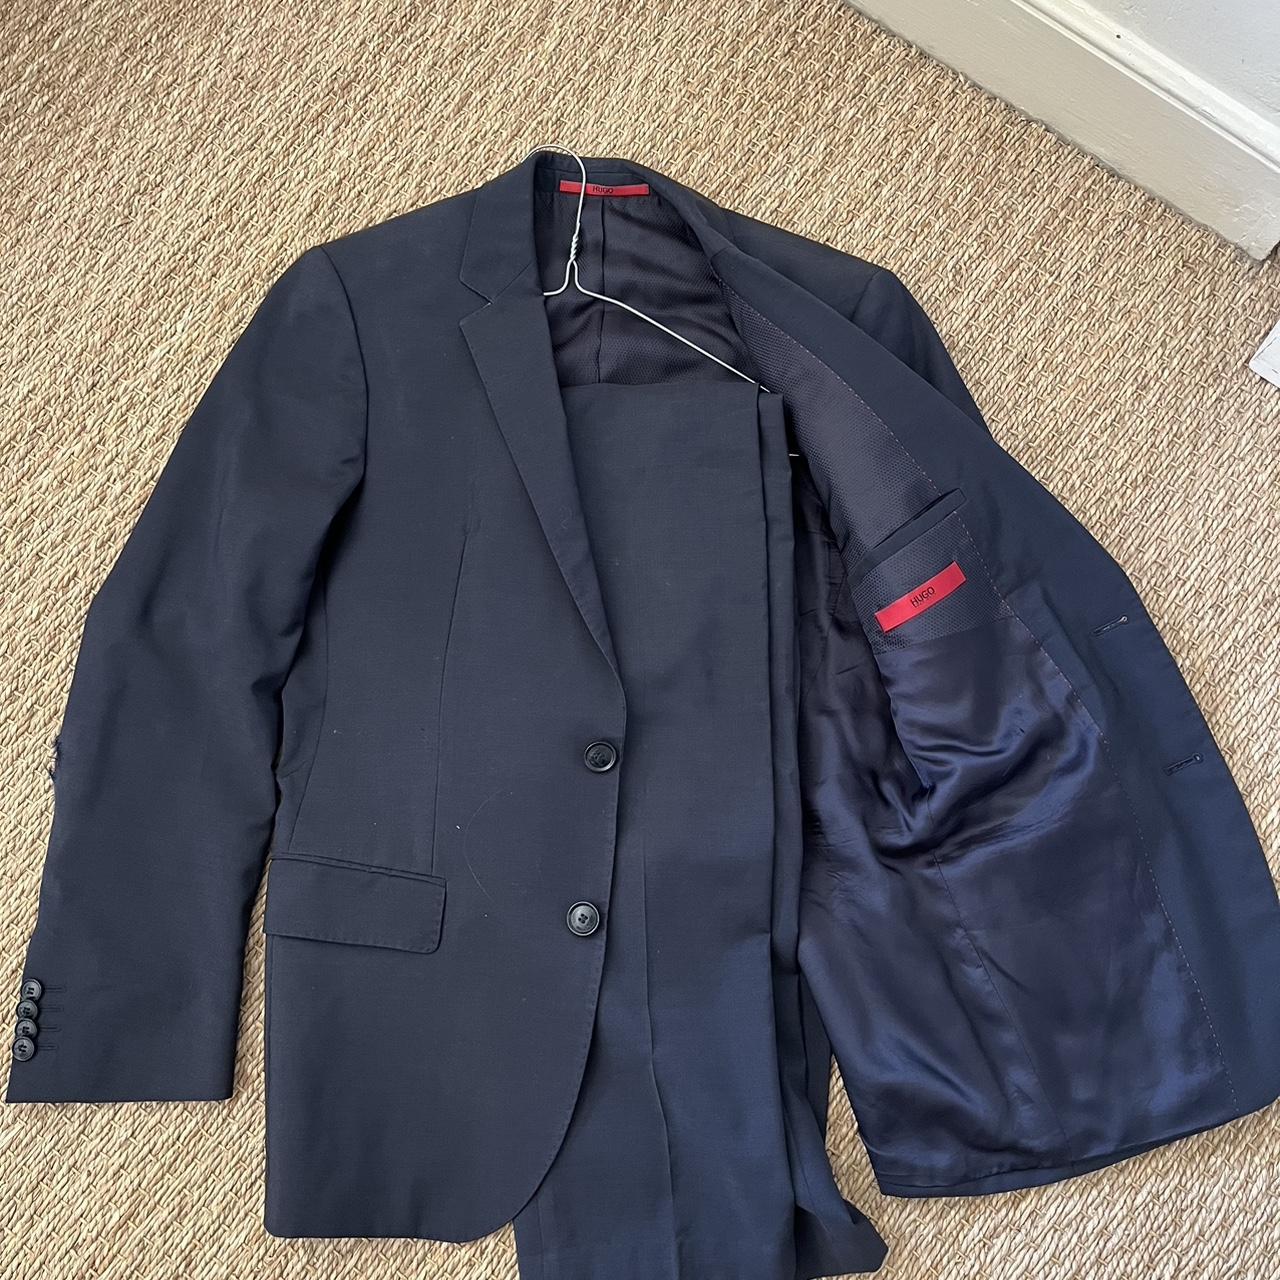 Hugo boss navy suit medium fit for young man only... - Depop